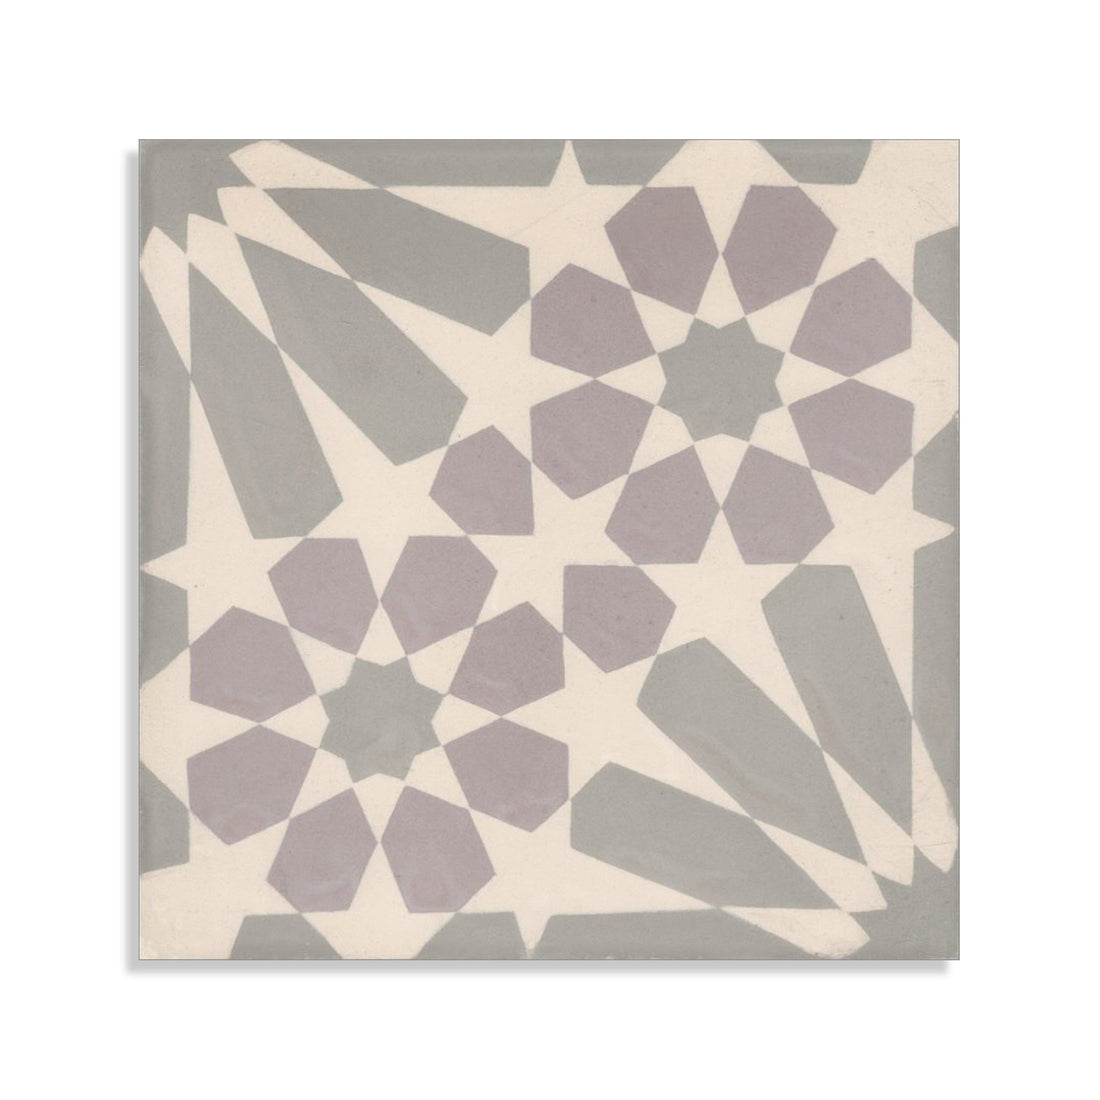 Moroccan Encaustic Cement Pattern gr12, 20 x 20cm - Tiles &amp; Stone To You